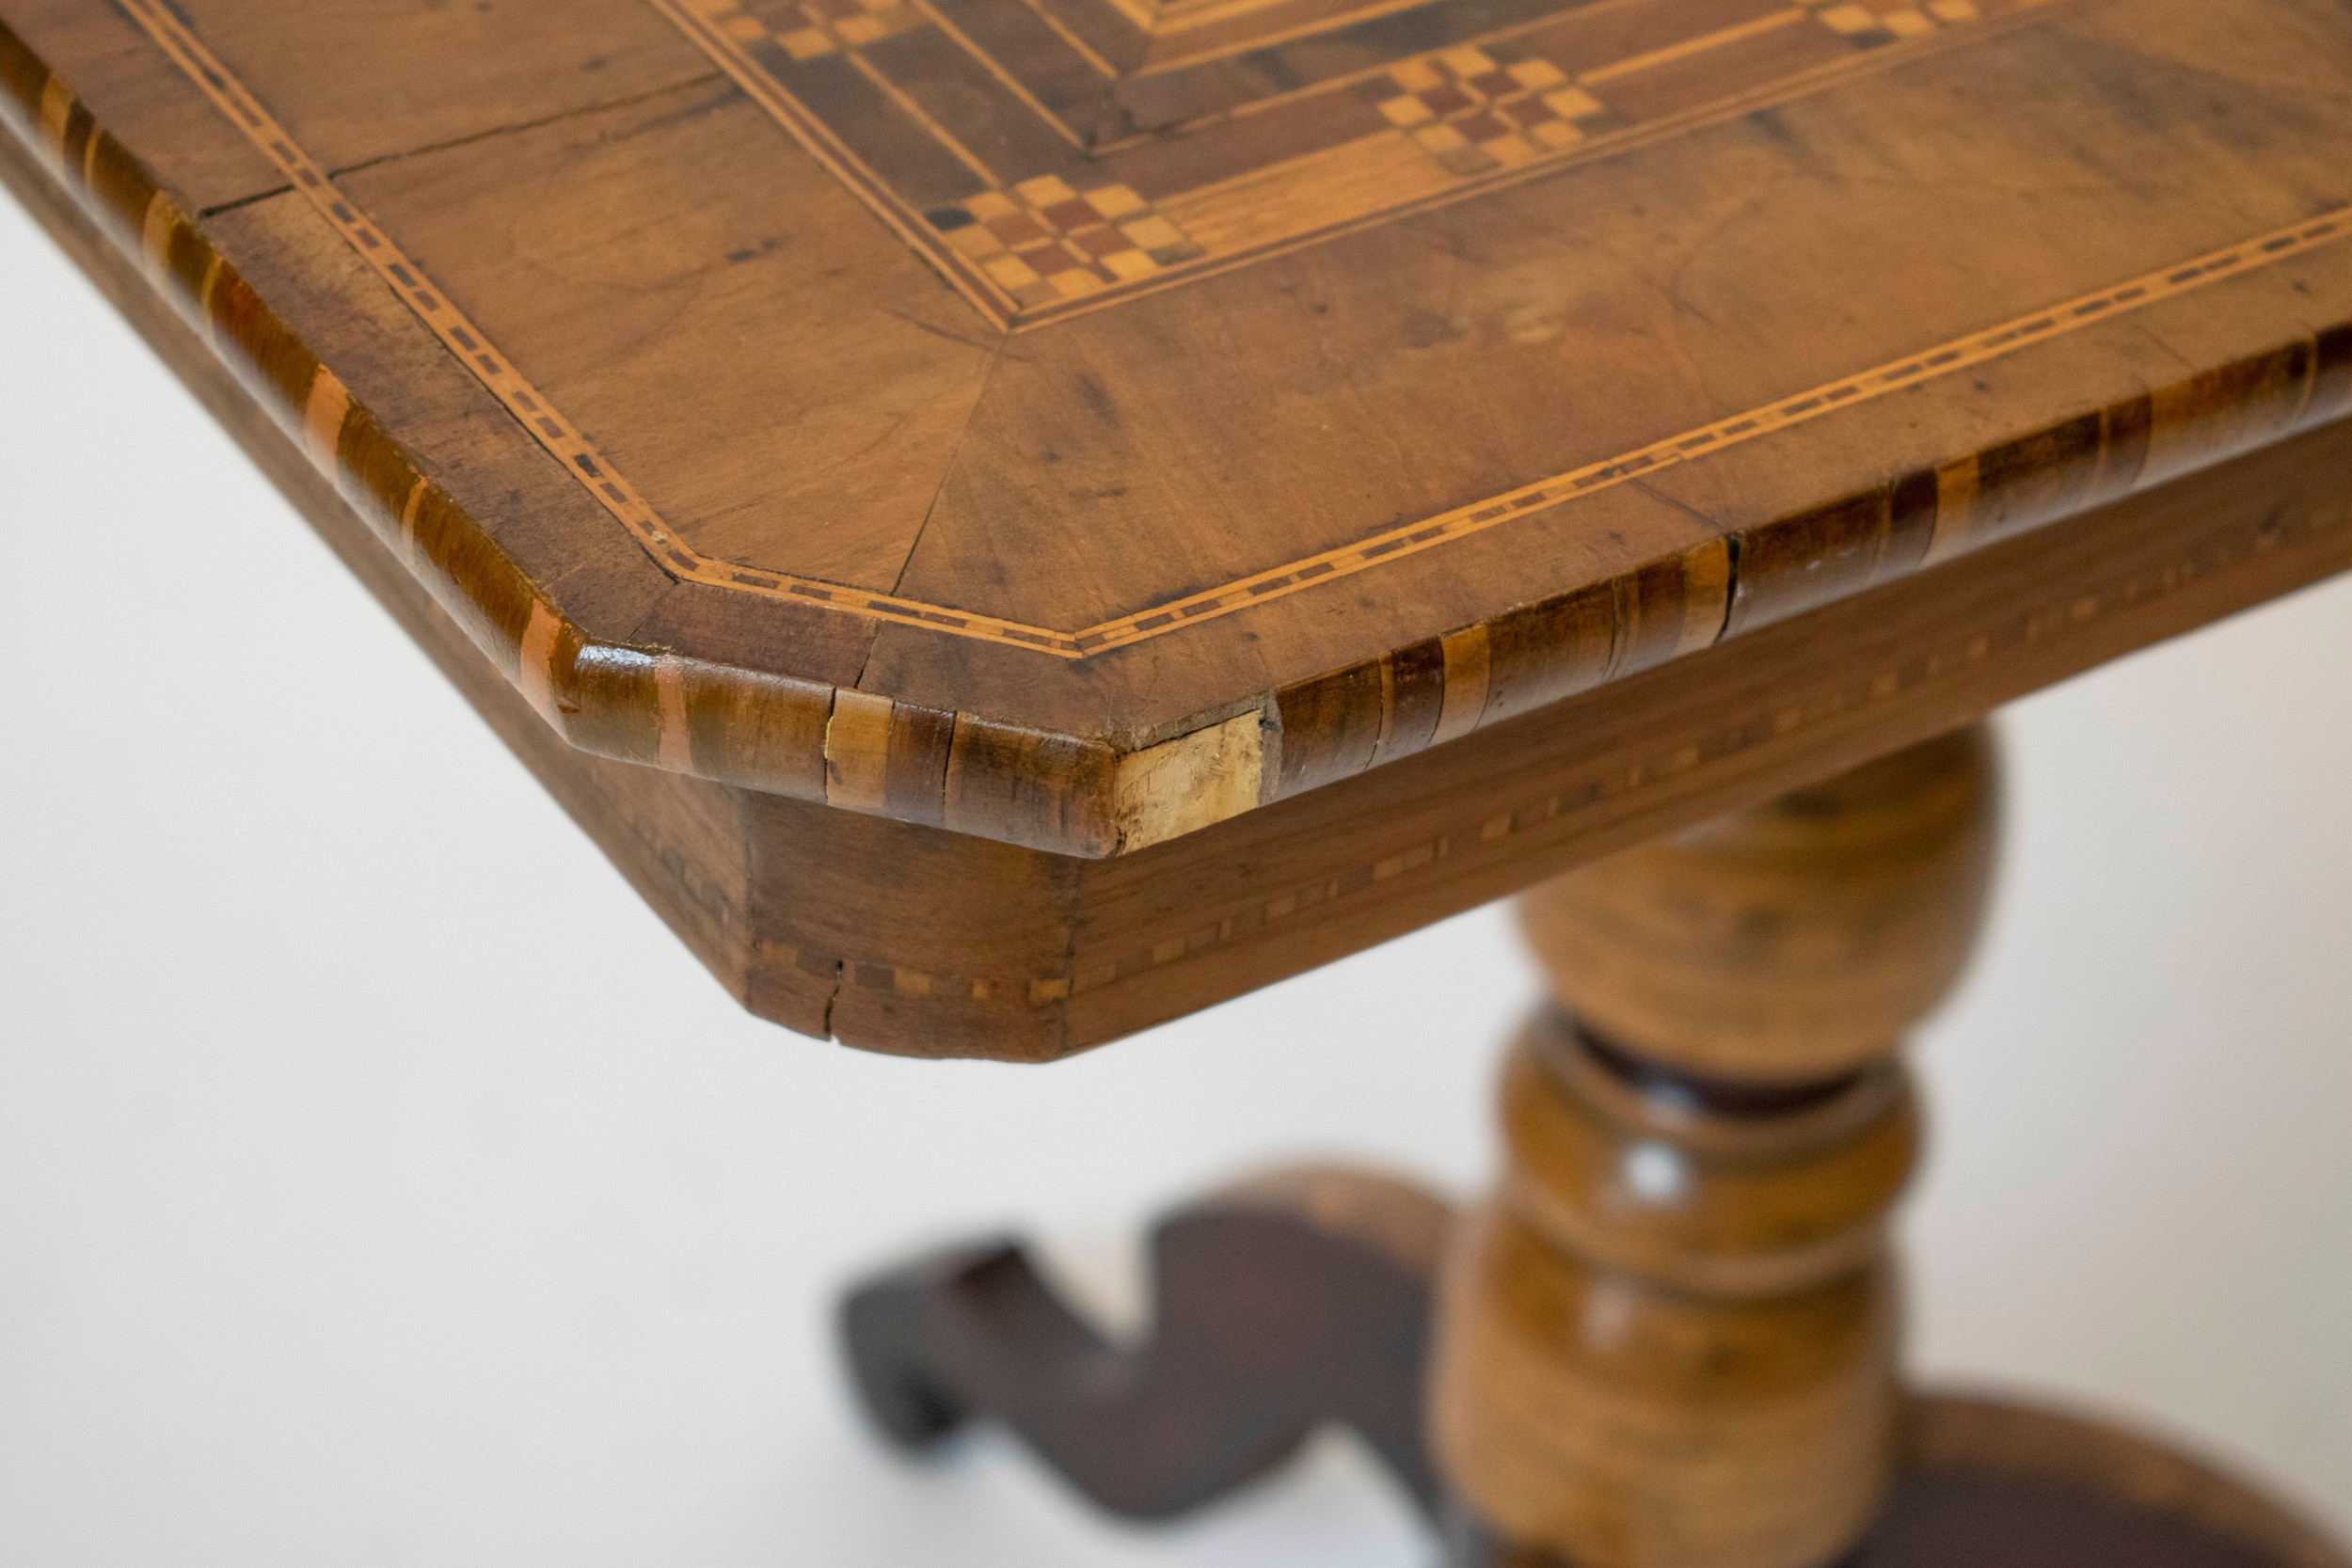 CENTRE TABLE, 76cm H x 80cm x 55cm D, 19th century Italian walnut, marquetry and parquetry. - Image 4 of 5